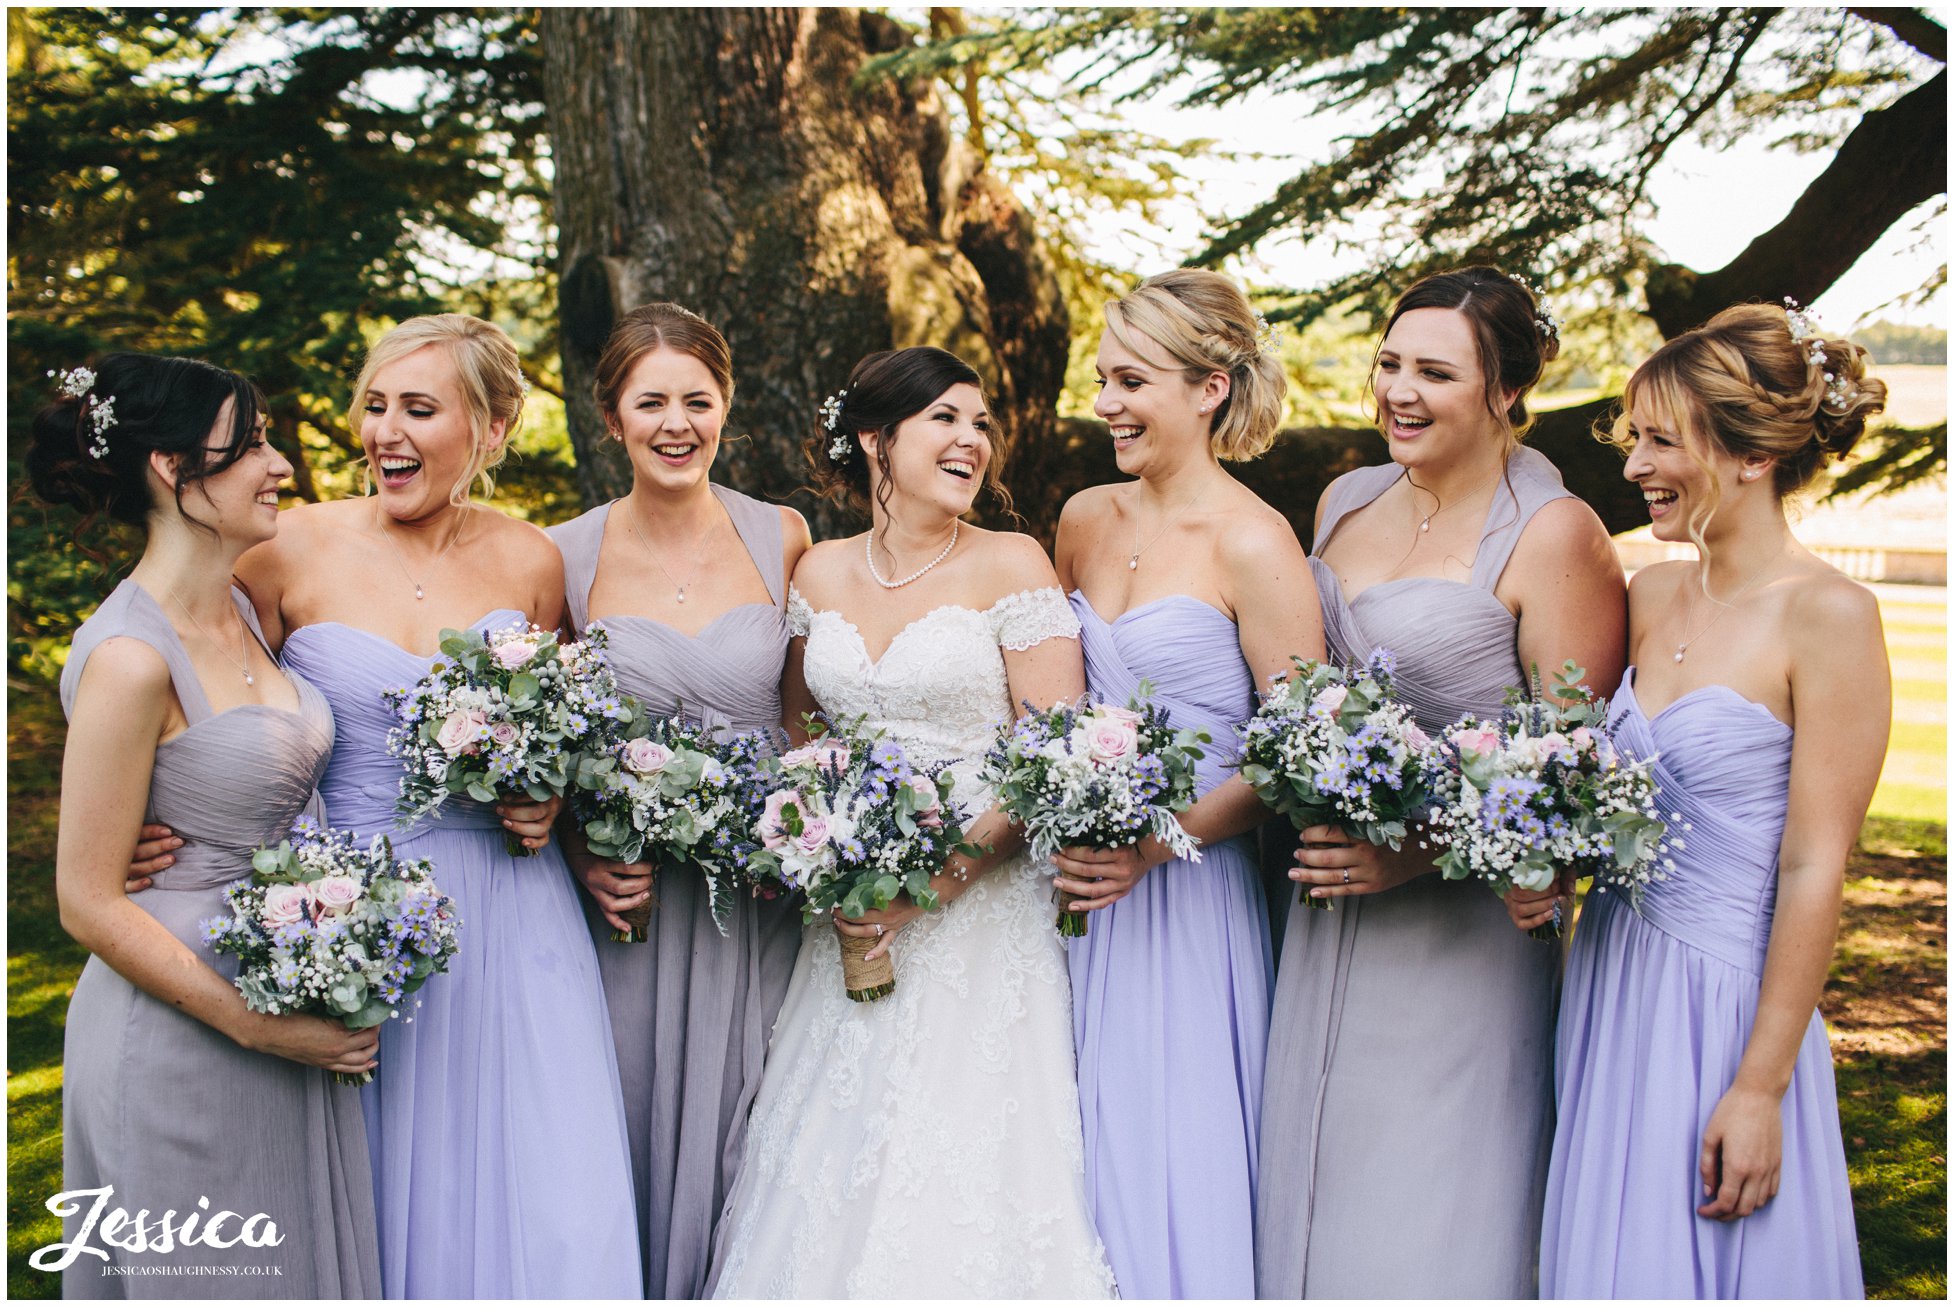 bride & bridesmaids laughing together at the loughborough wedding